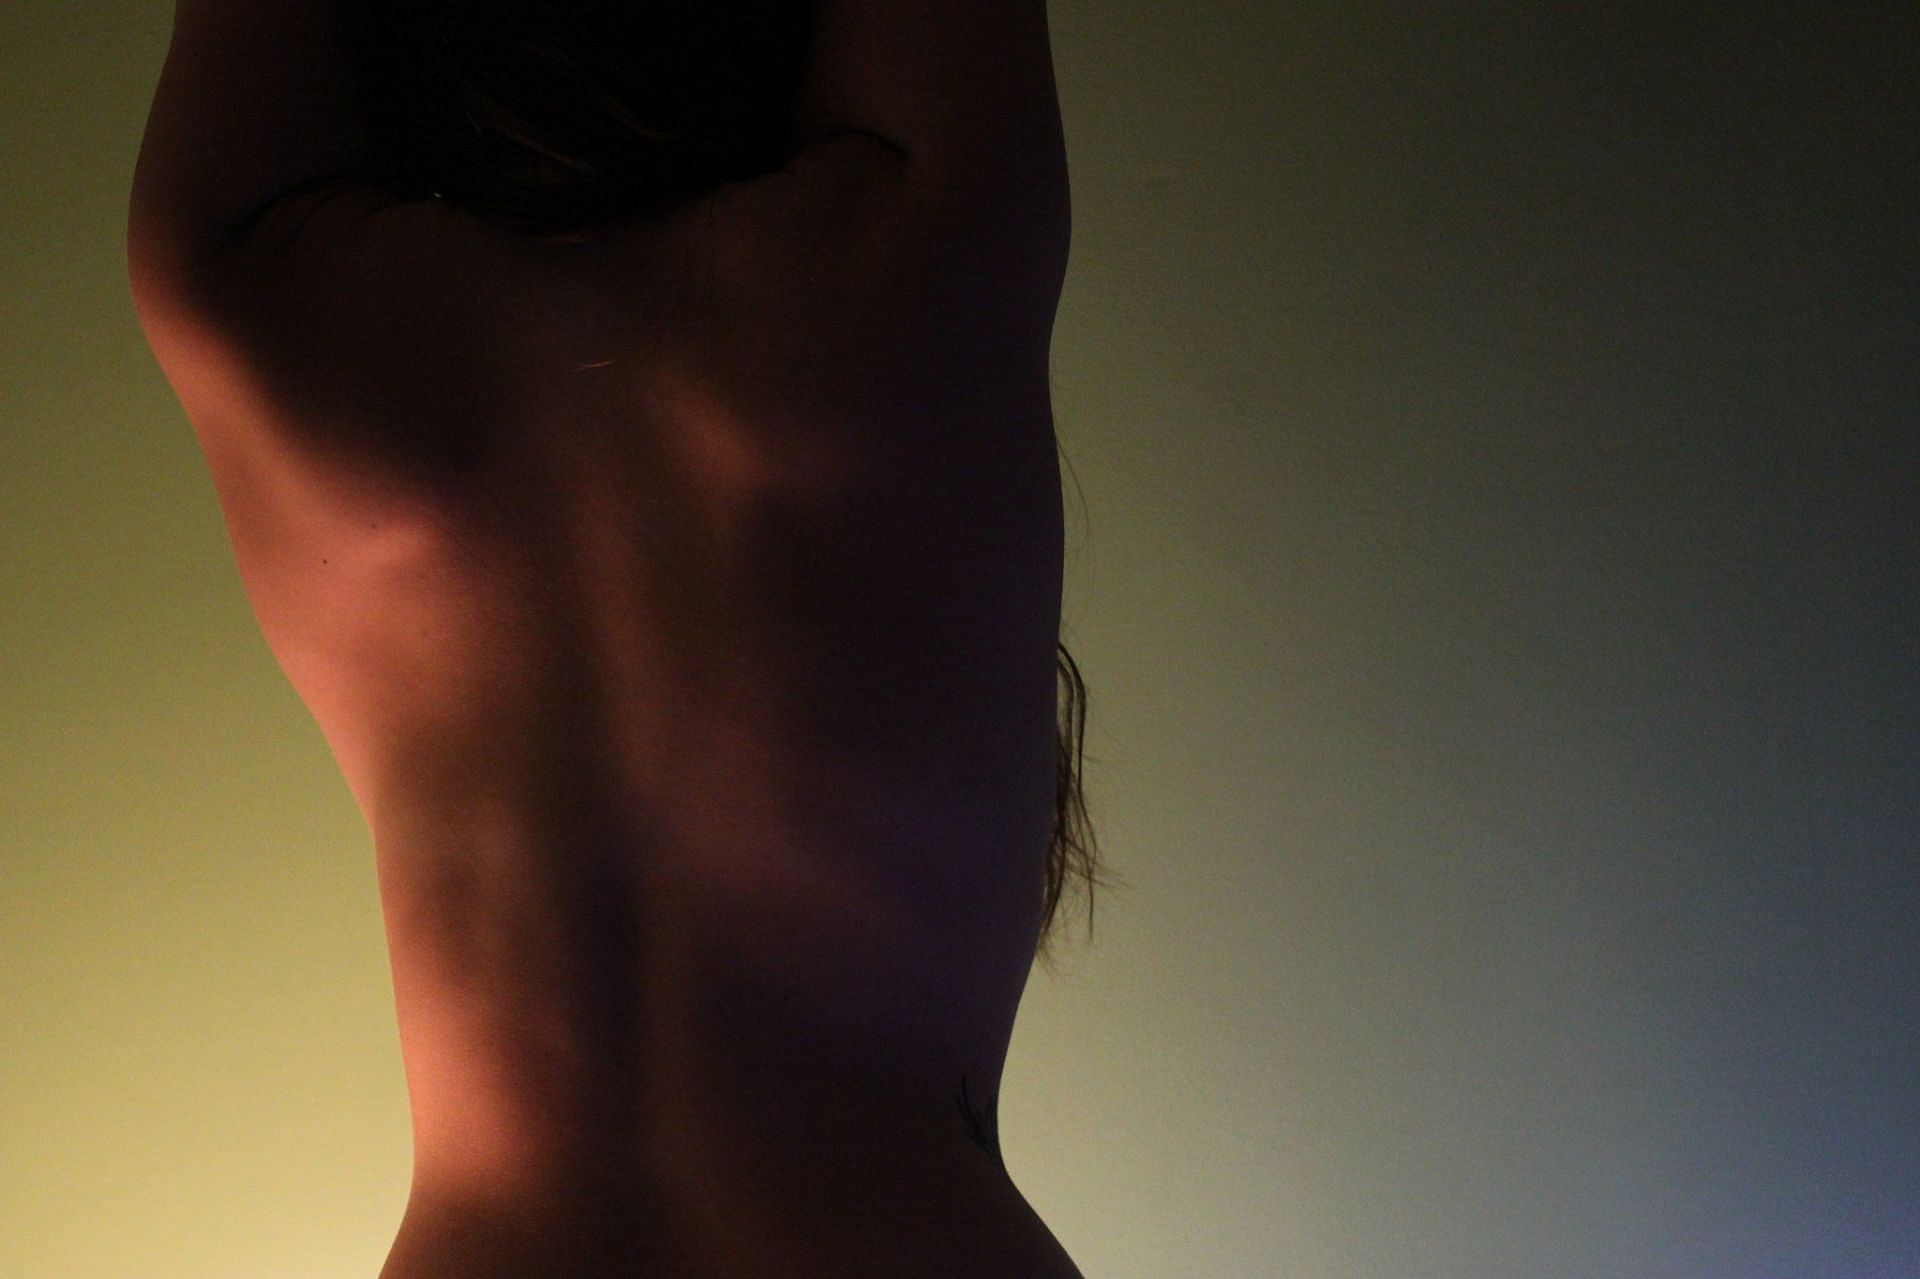 Scoliosis is the name given to a condition in which the spine curves sideways (Image via Flickr)